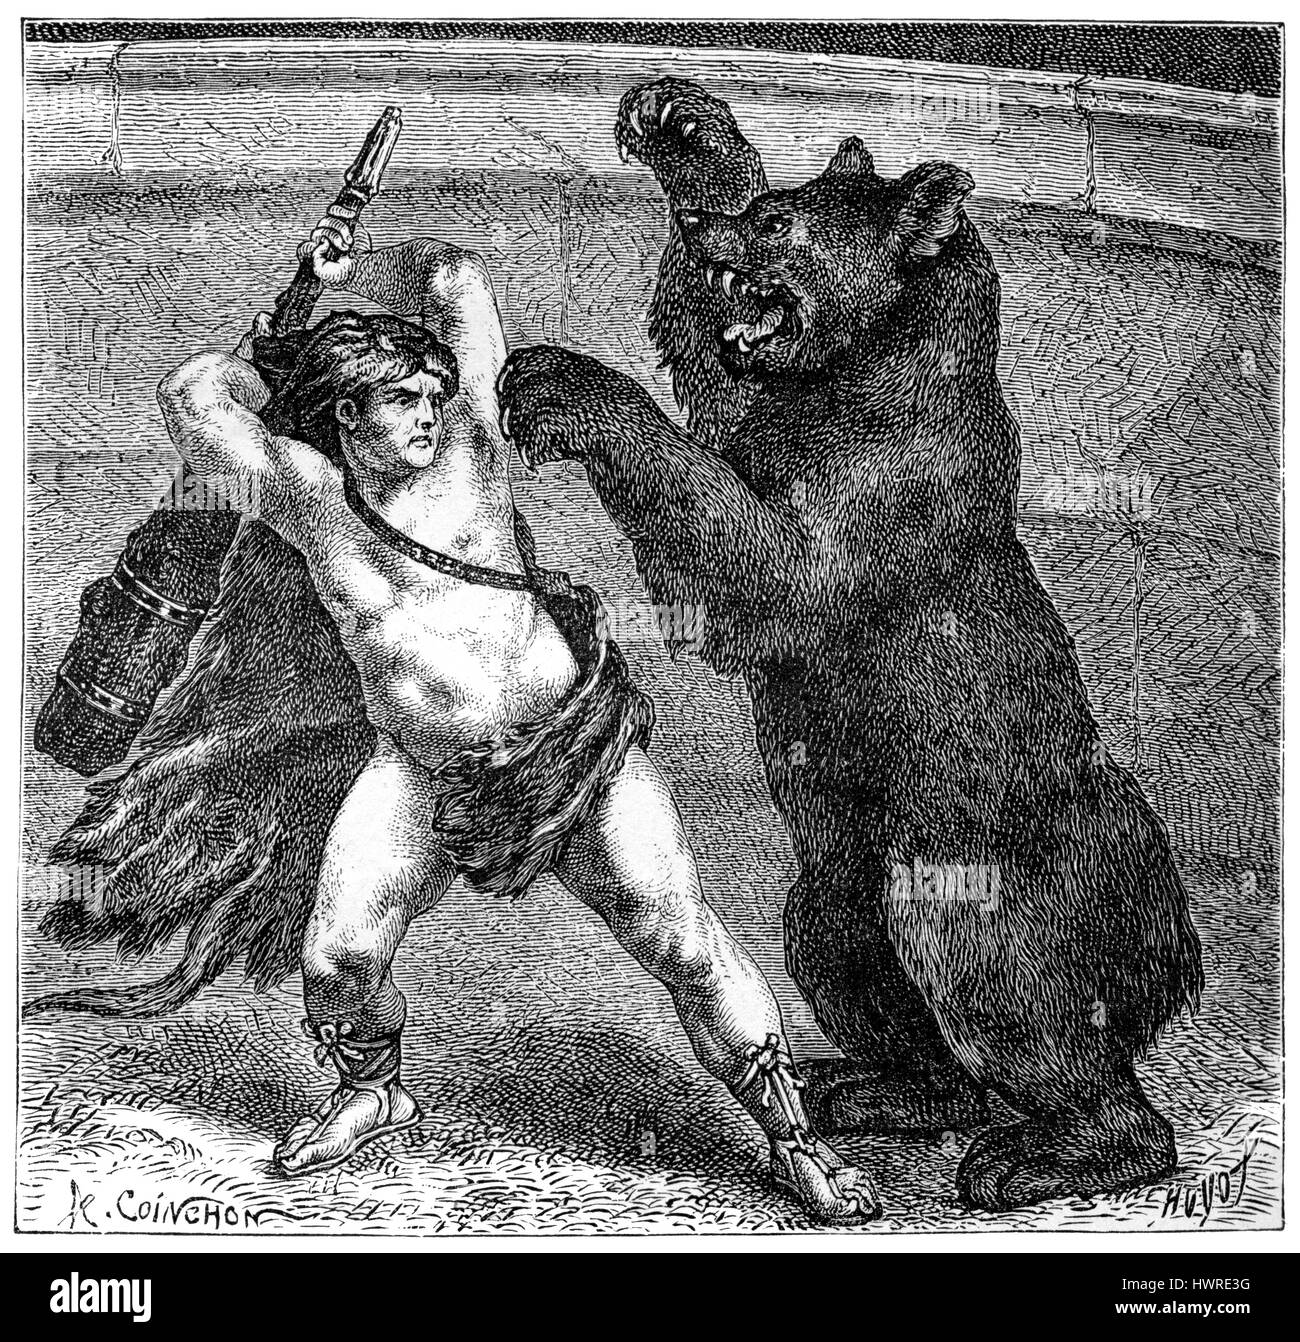 Roman Circus. Empero   Lucius Aurelius Commodus  in his personna as Hercules fights a  bea with a heavy weaponr. Stock Photo